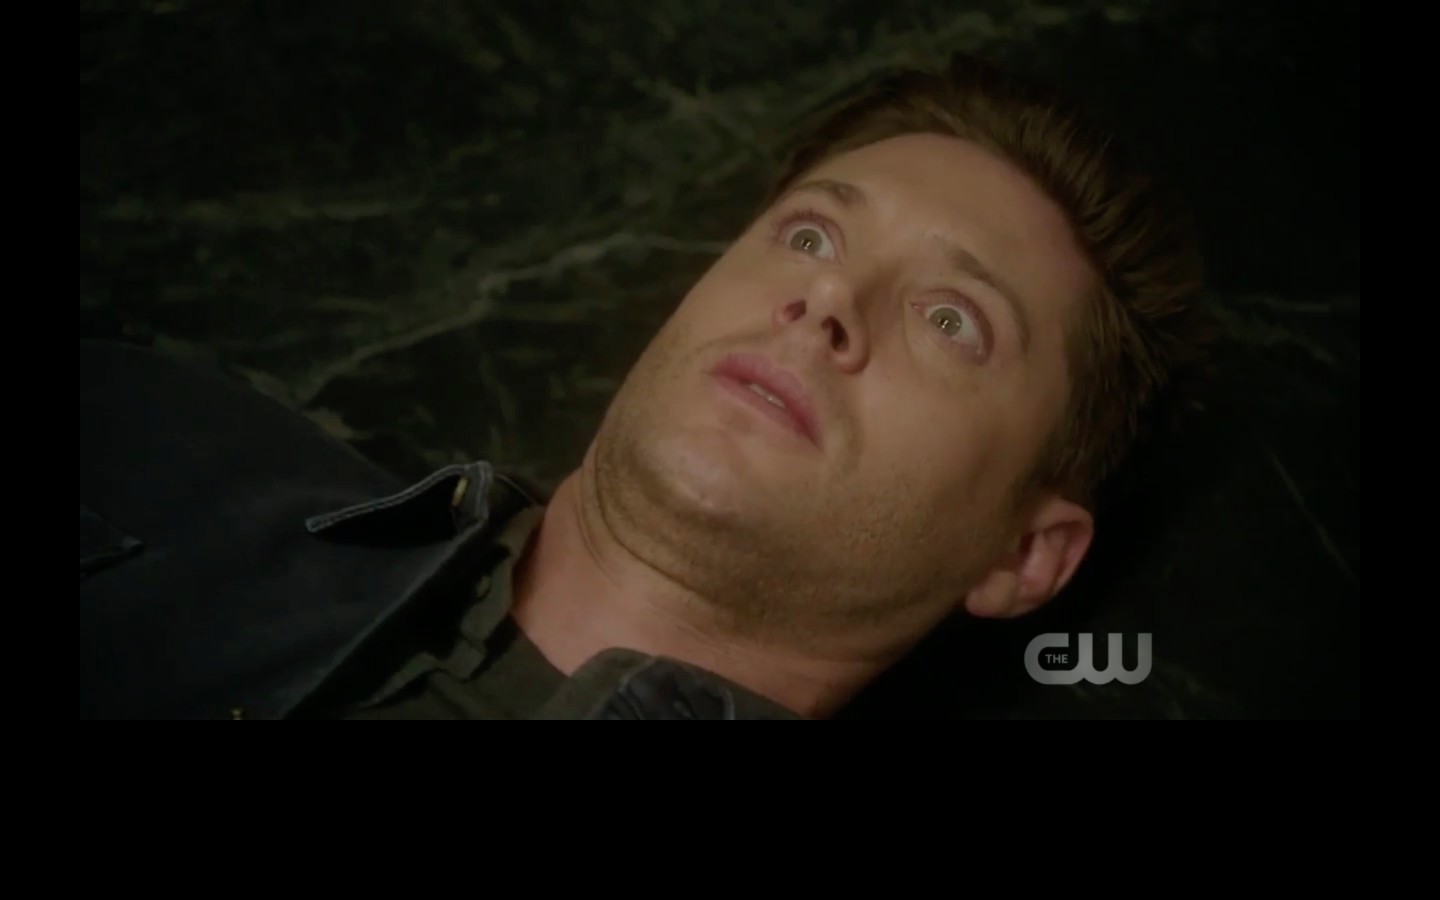 Supernatural Dean And Sam Porn - The Thing brings iconic 'Supernatural' | Movie TV Tech Geeks ...